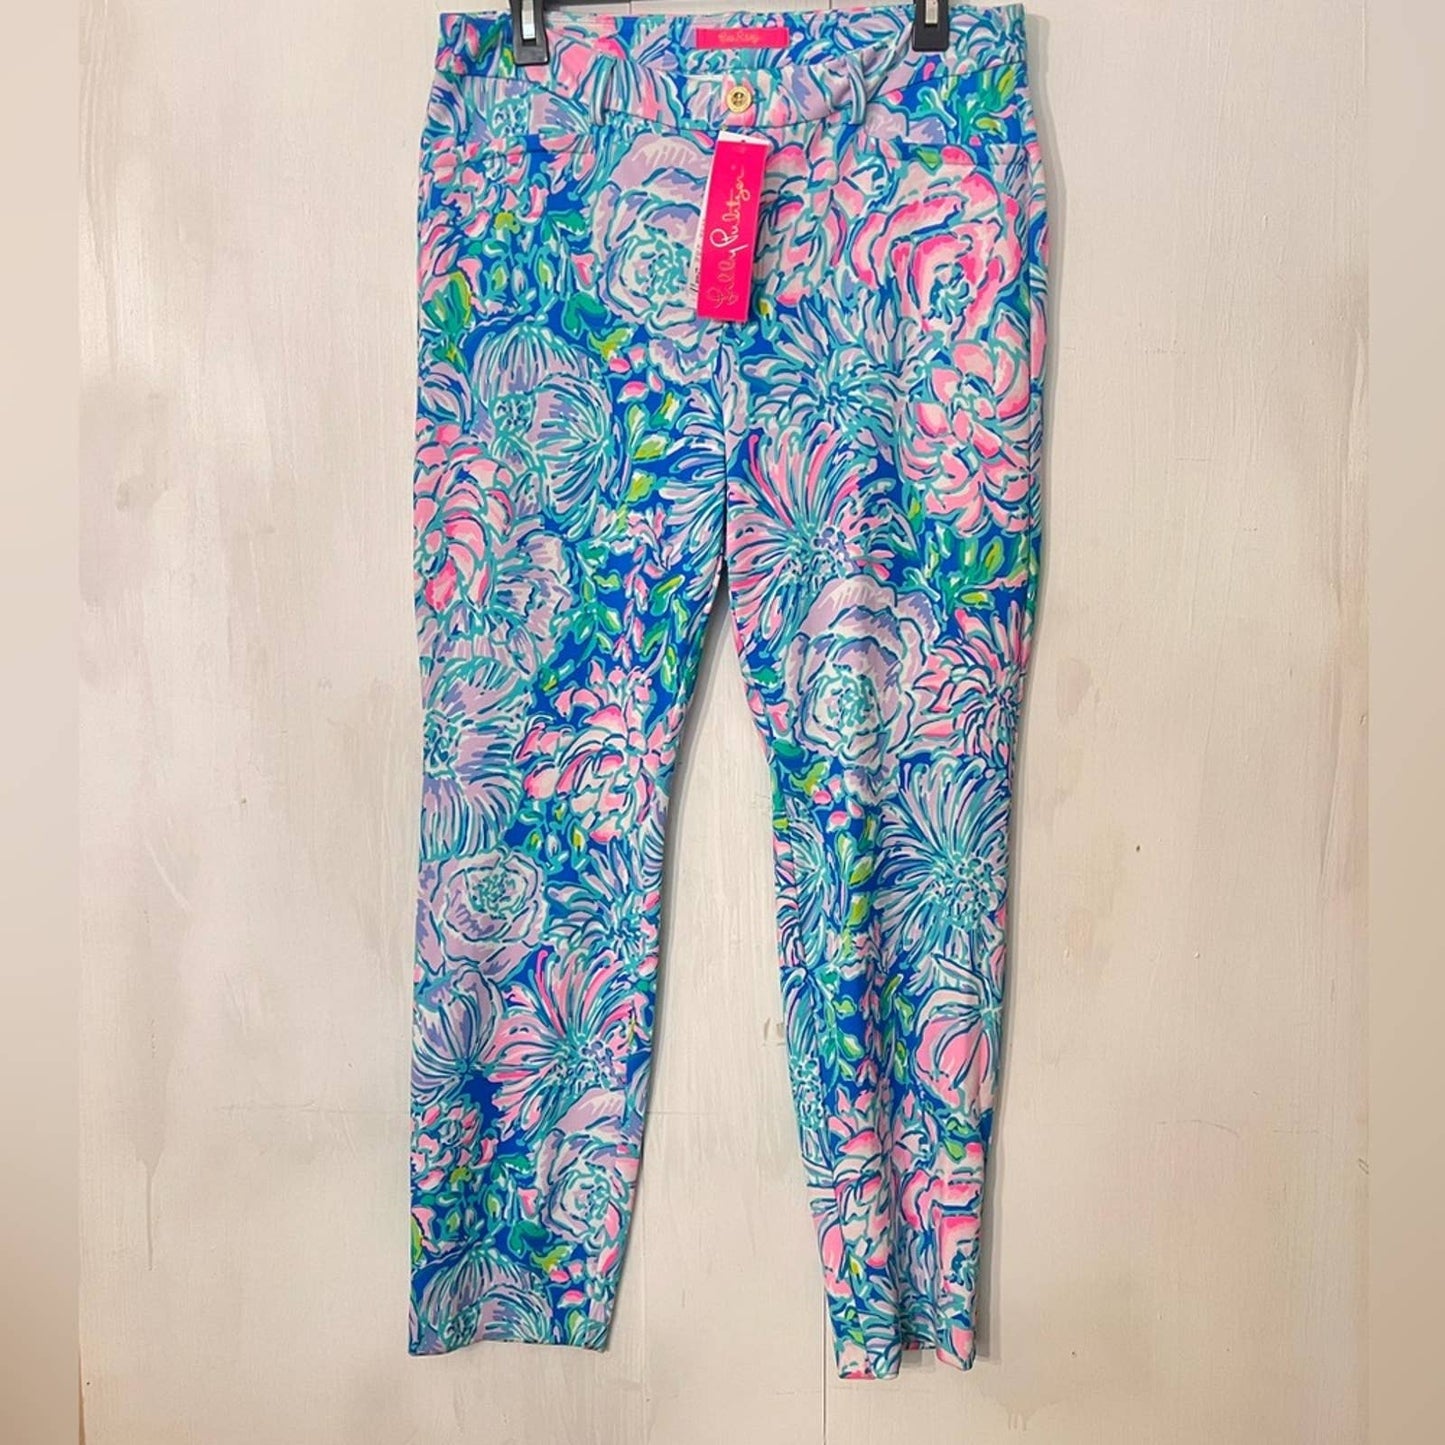 KELLY HIGH RISE KNIT SKINNY ANKLE PANT
MULTIcolor IN FULL BLOOM • SIZE: 12